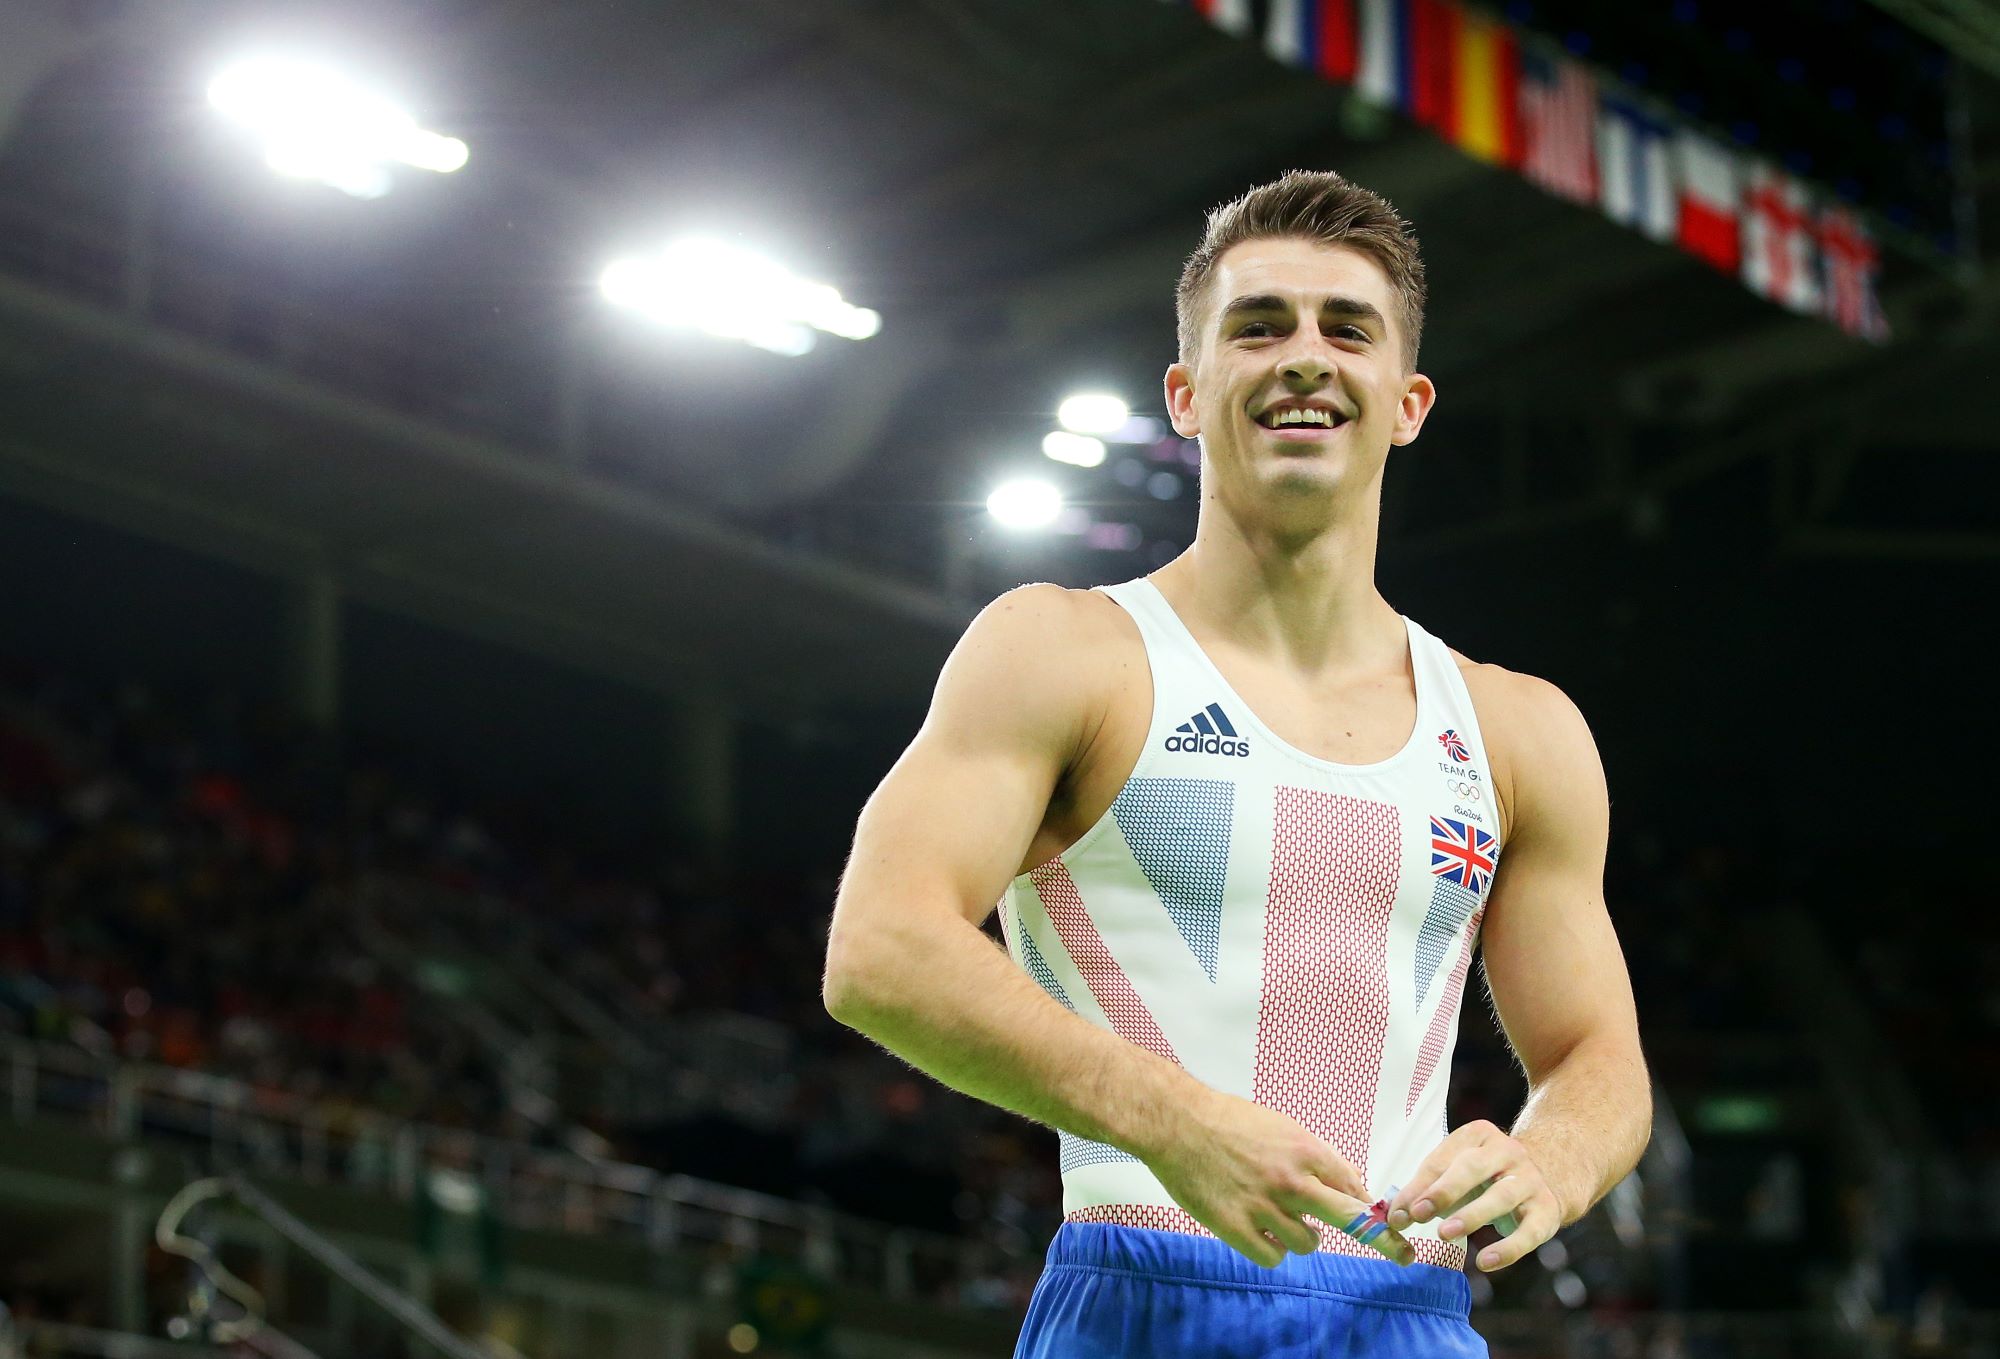 18-facts-about-max-whitlock